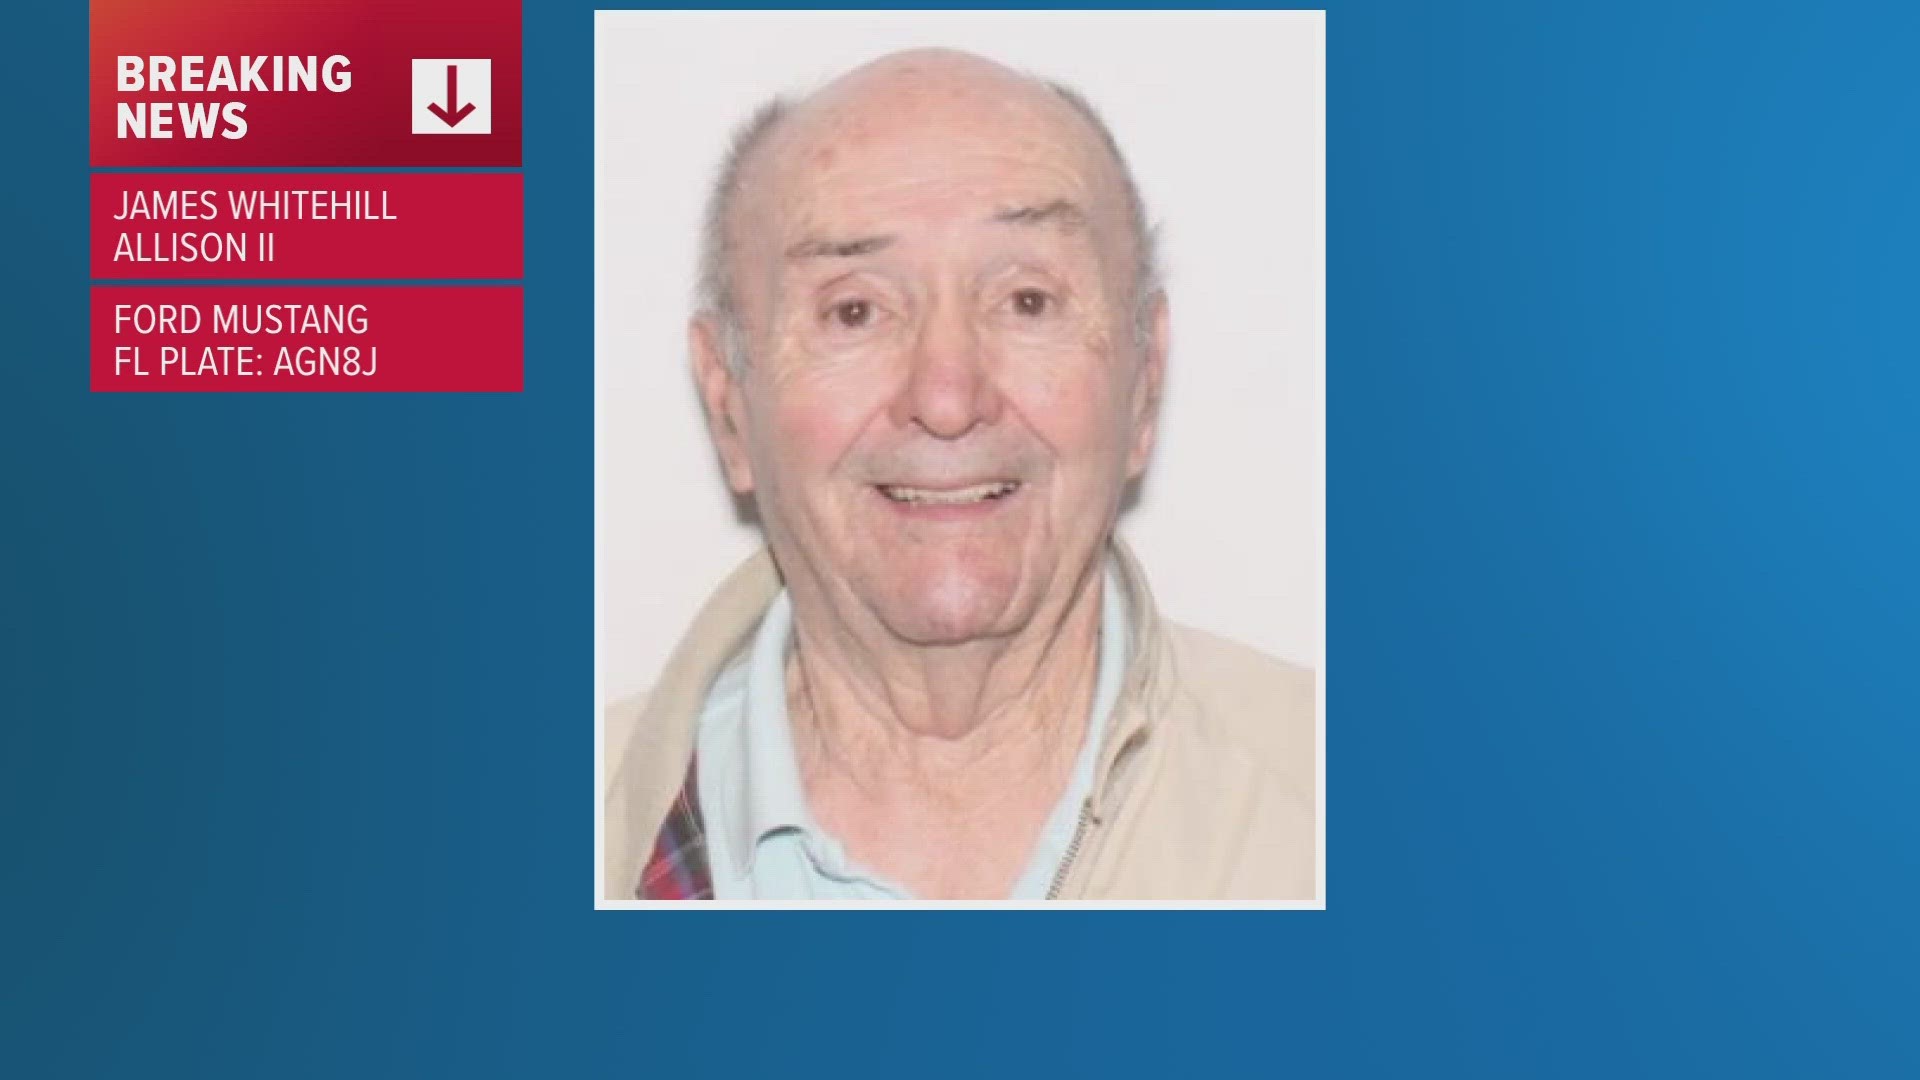 A Silver Alert was issued Monday night for 81-year-old James Whitehall Allison II. He may be in Melbourne or Orlando.